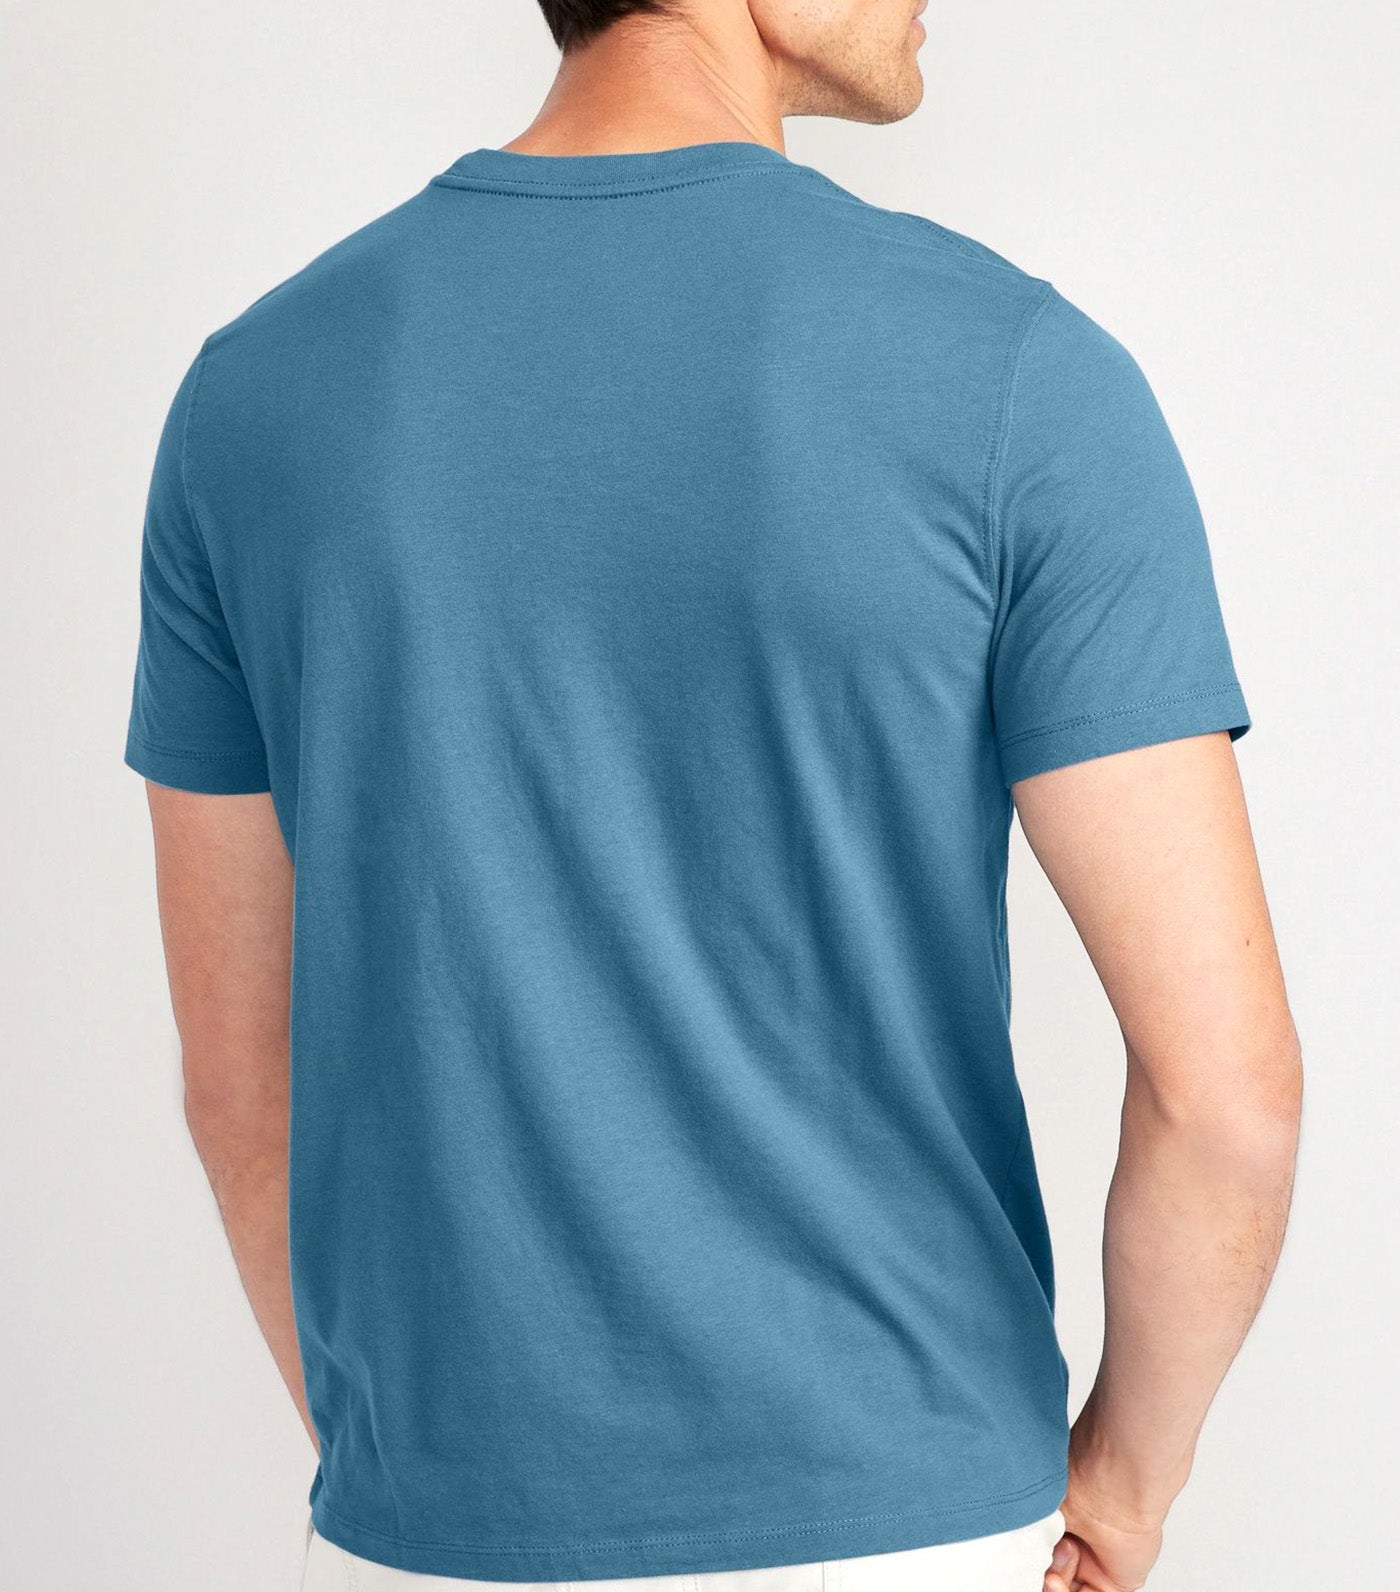 Soft-Washed Crew-Neck T-Shirt for Men Why So Blue